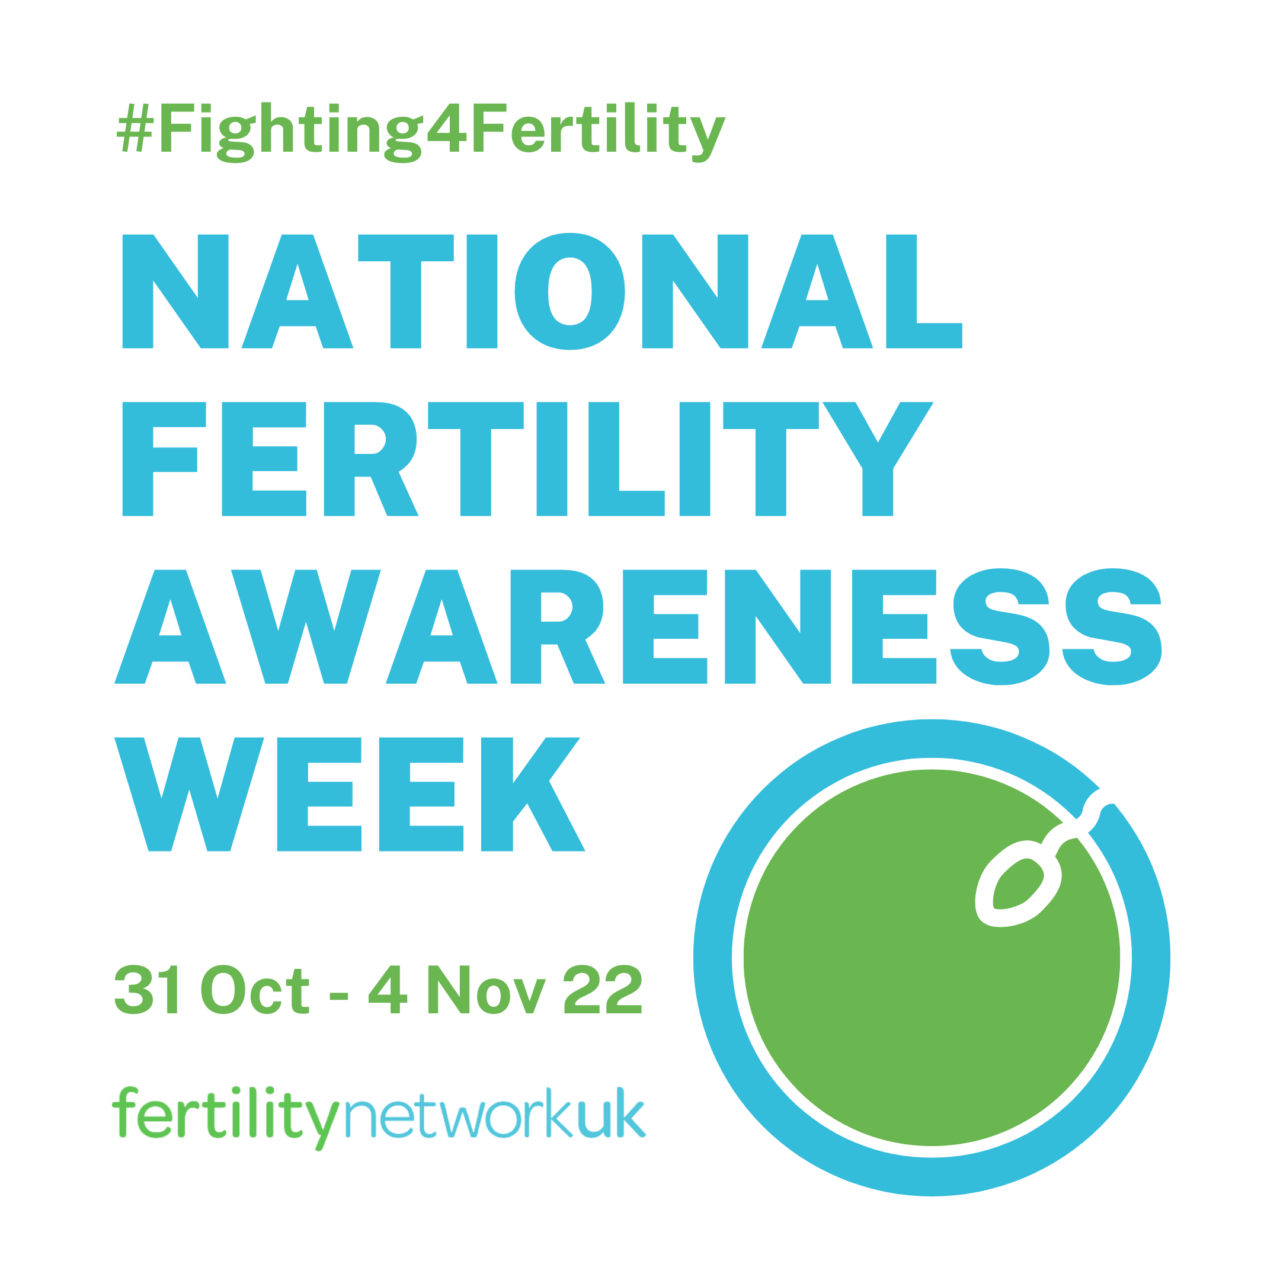 One month to go to National Fertility Awareness Week Fertility Network